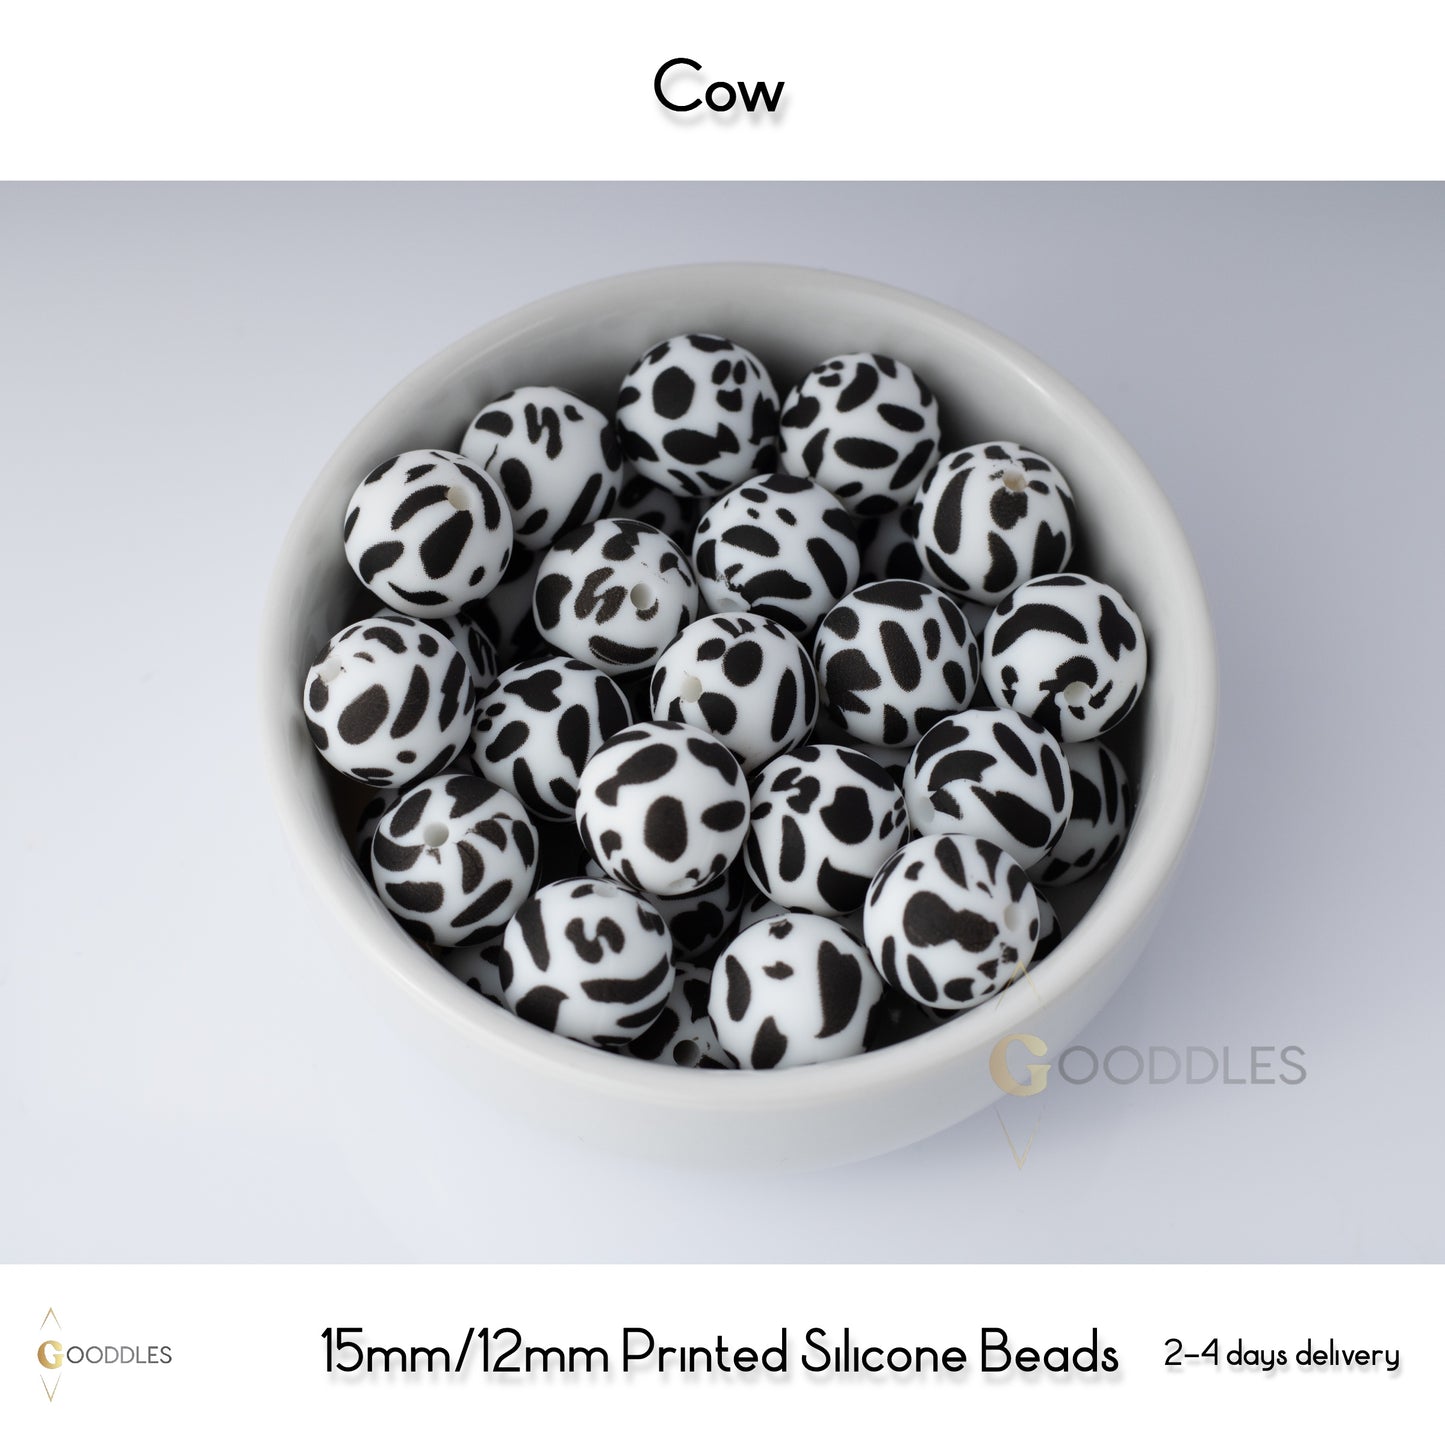 5pcs, Cow Silicone Beads Printed Round Silicone Beads